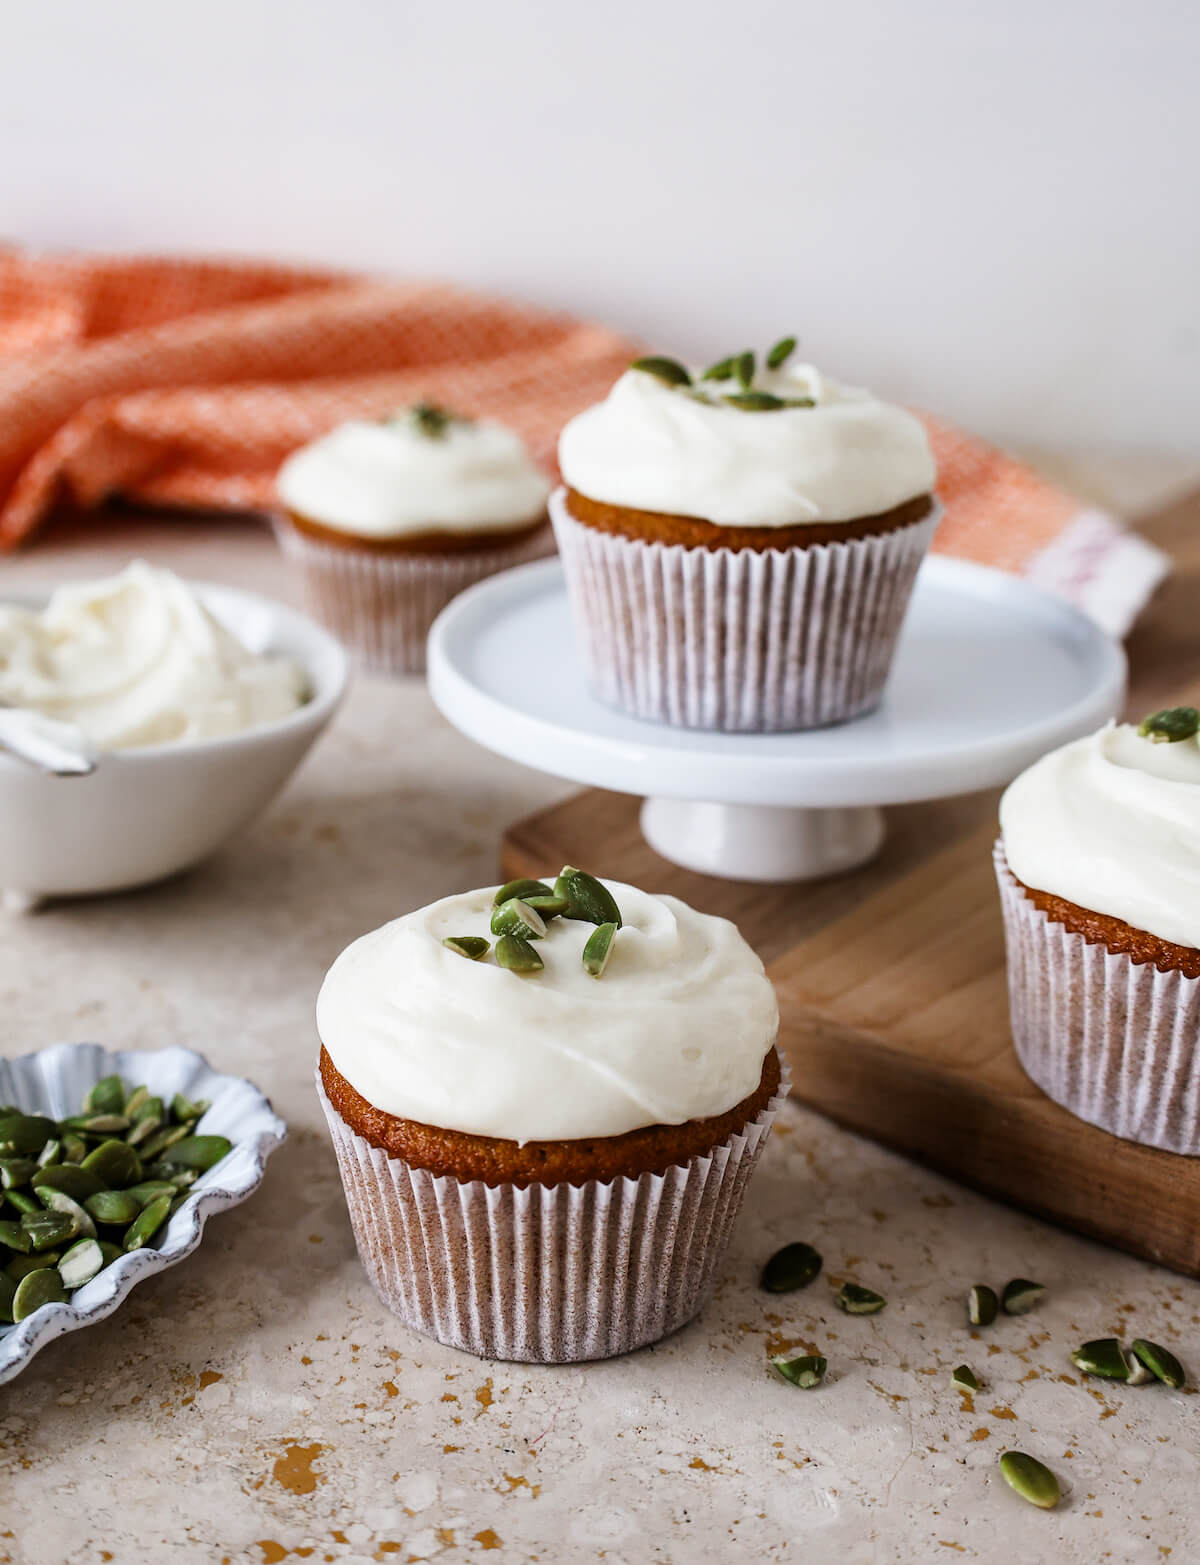 Several frosted pumpkin cupcakes in white papers on a table with a cutting board.